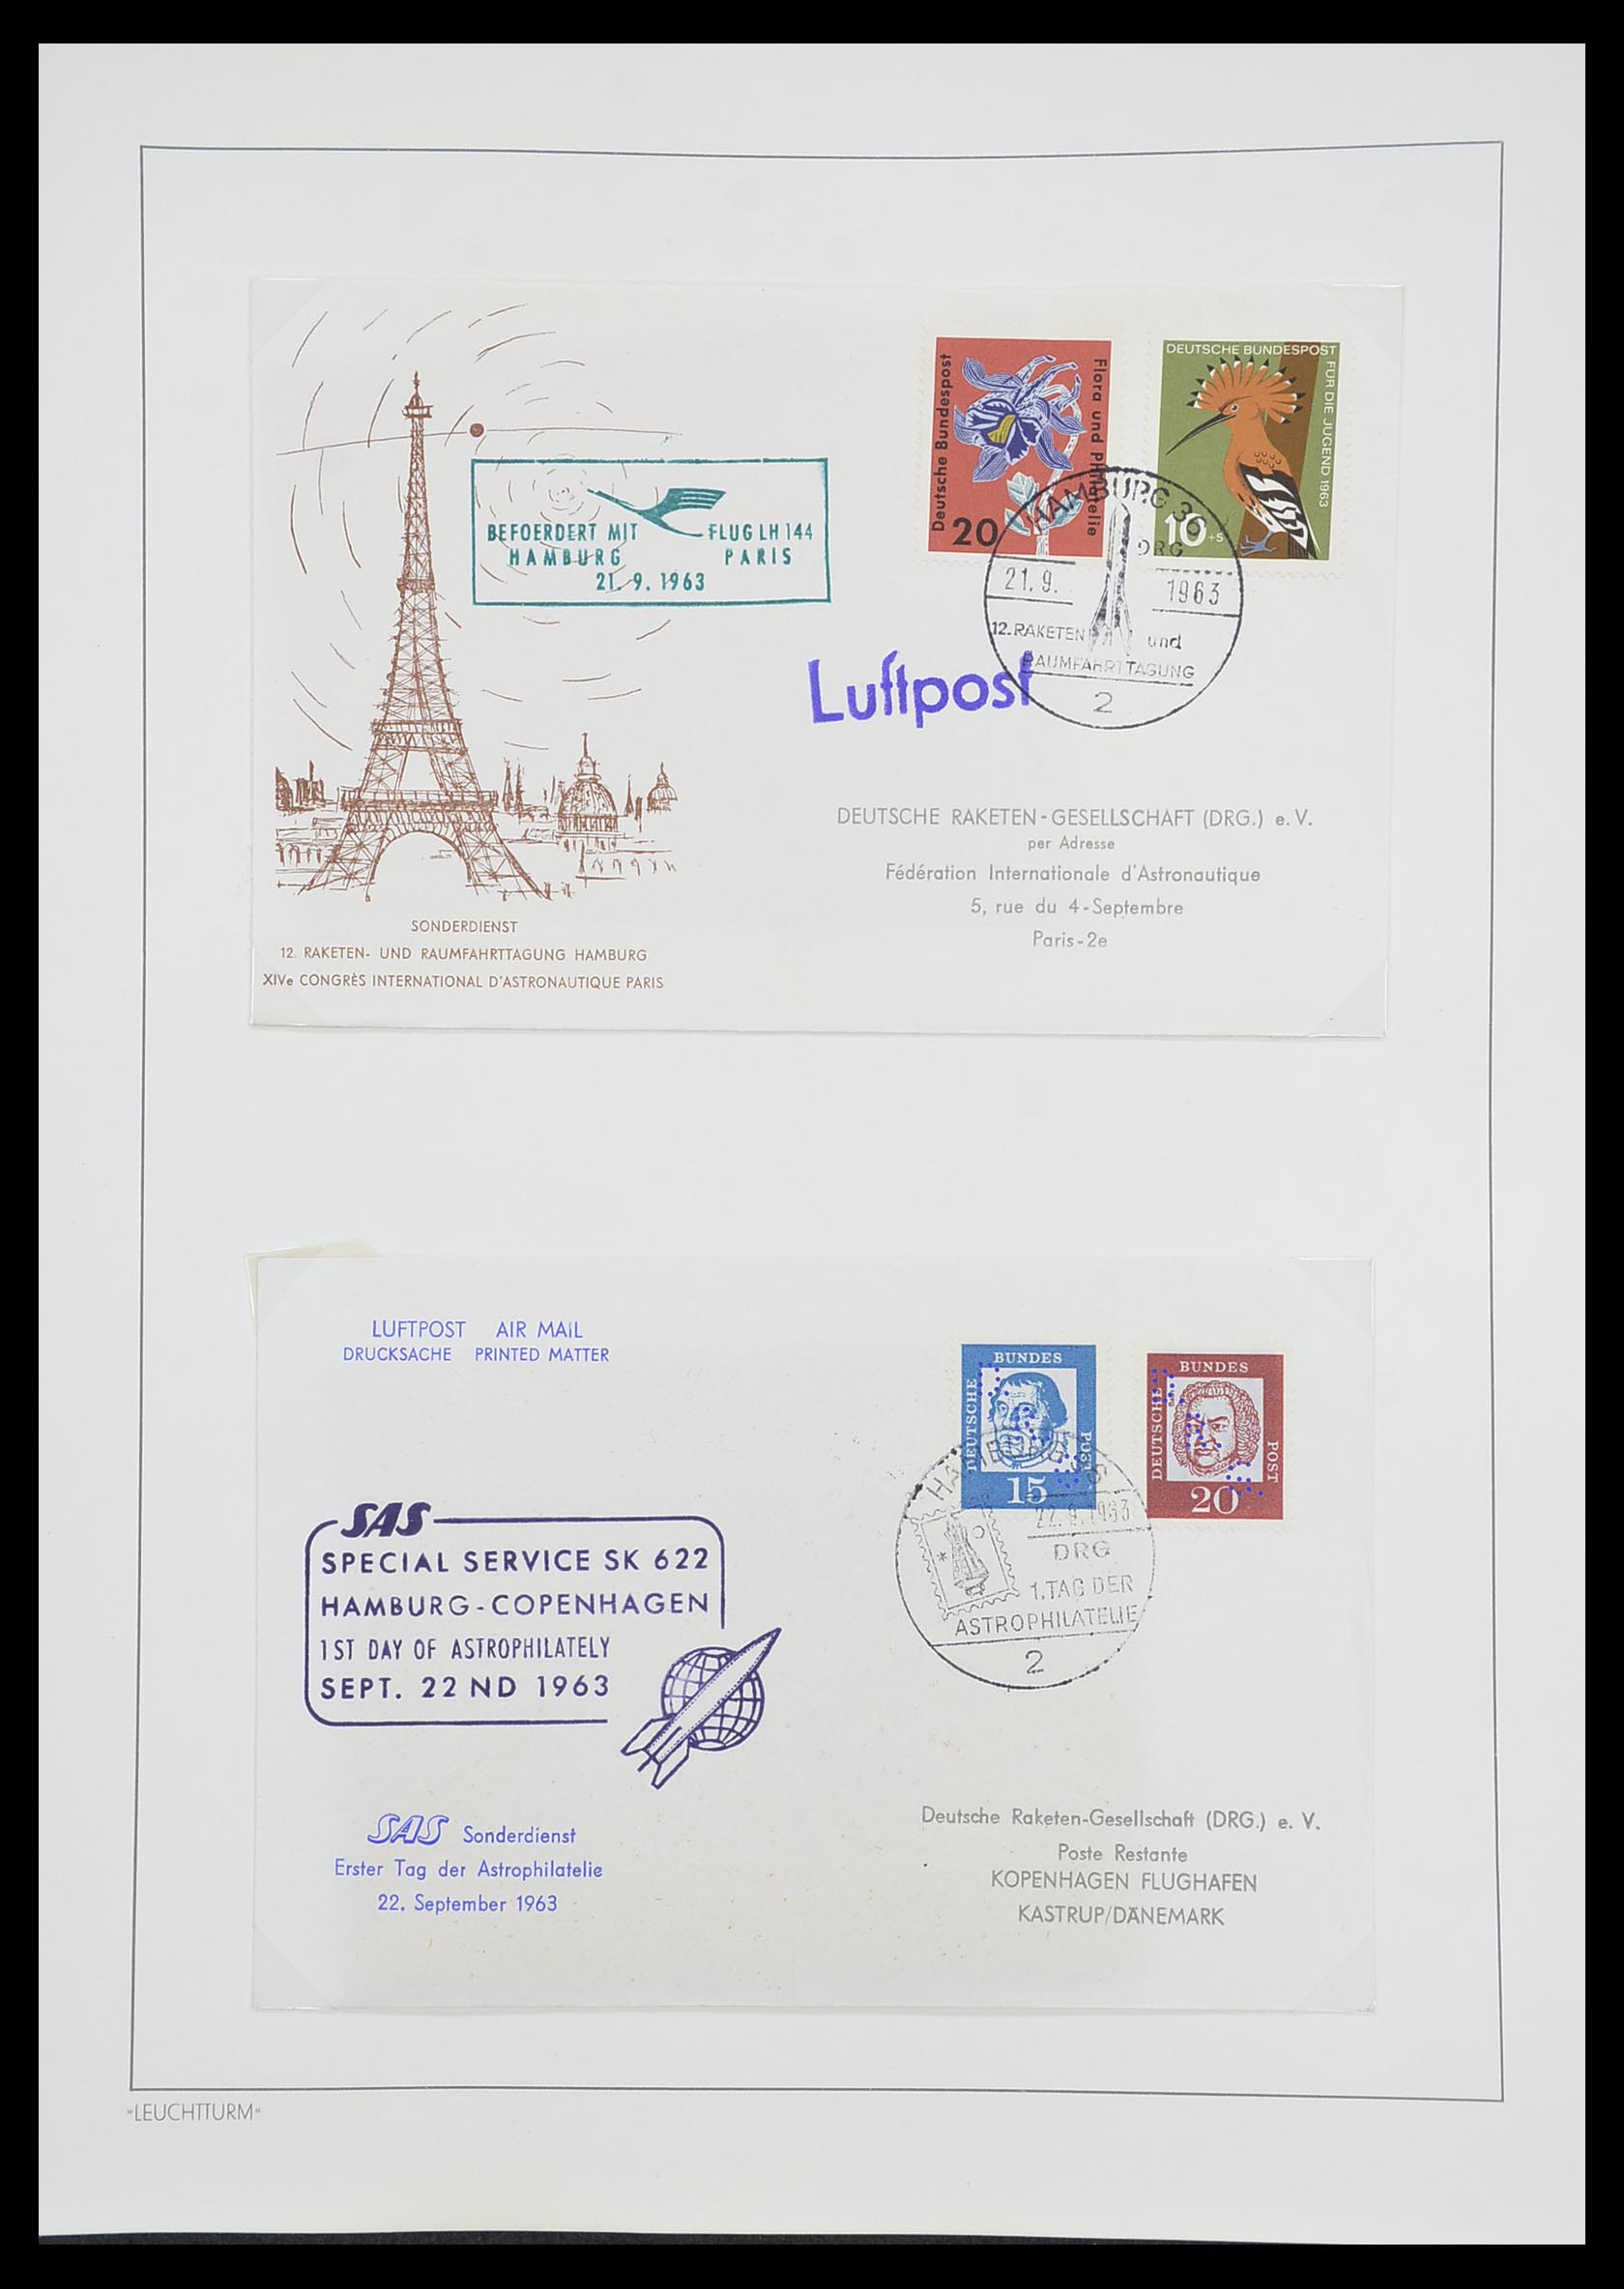 33463 117 - Stamp collection 33463 Rocket mail covers.